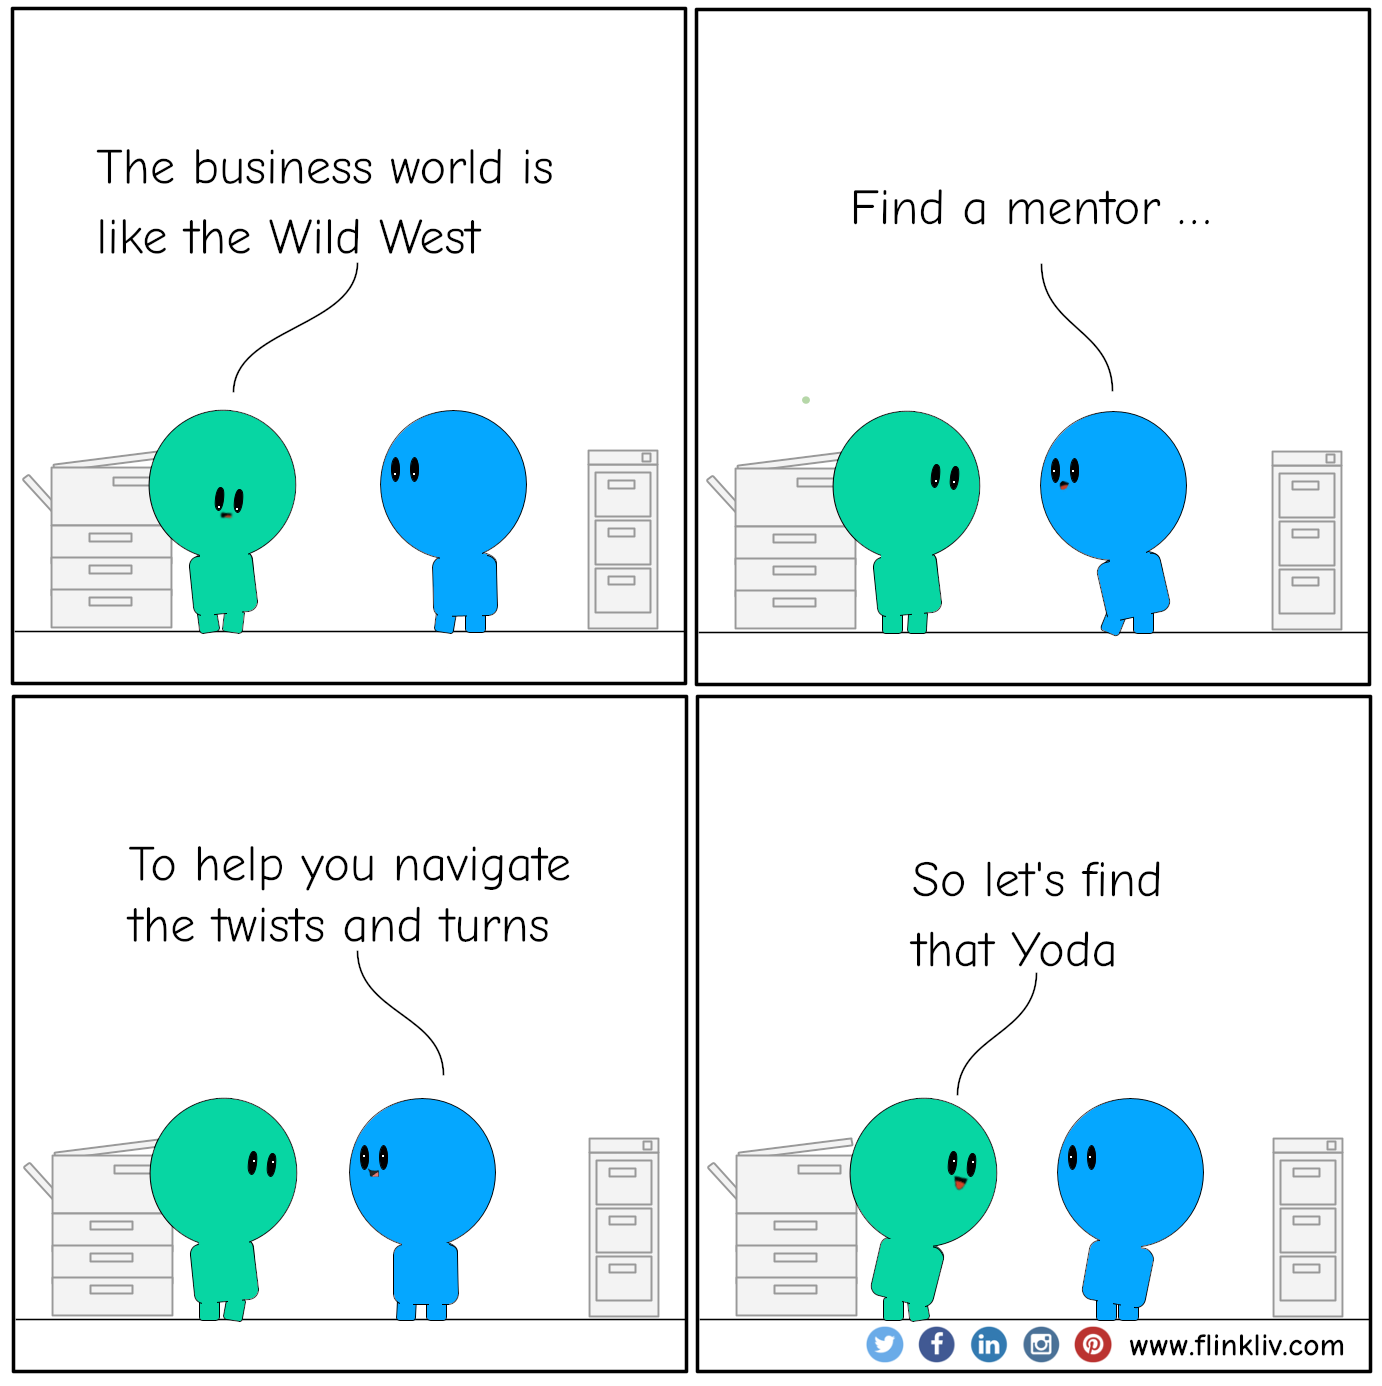 Conversation between A and B about the benefit of having a mentor
				A: The business world's like the Wild West.
				B: Find a mentor. To help you navigate the twists and turns
				A: So let's find that Yoda
              